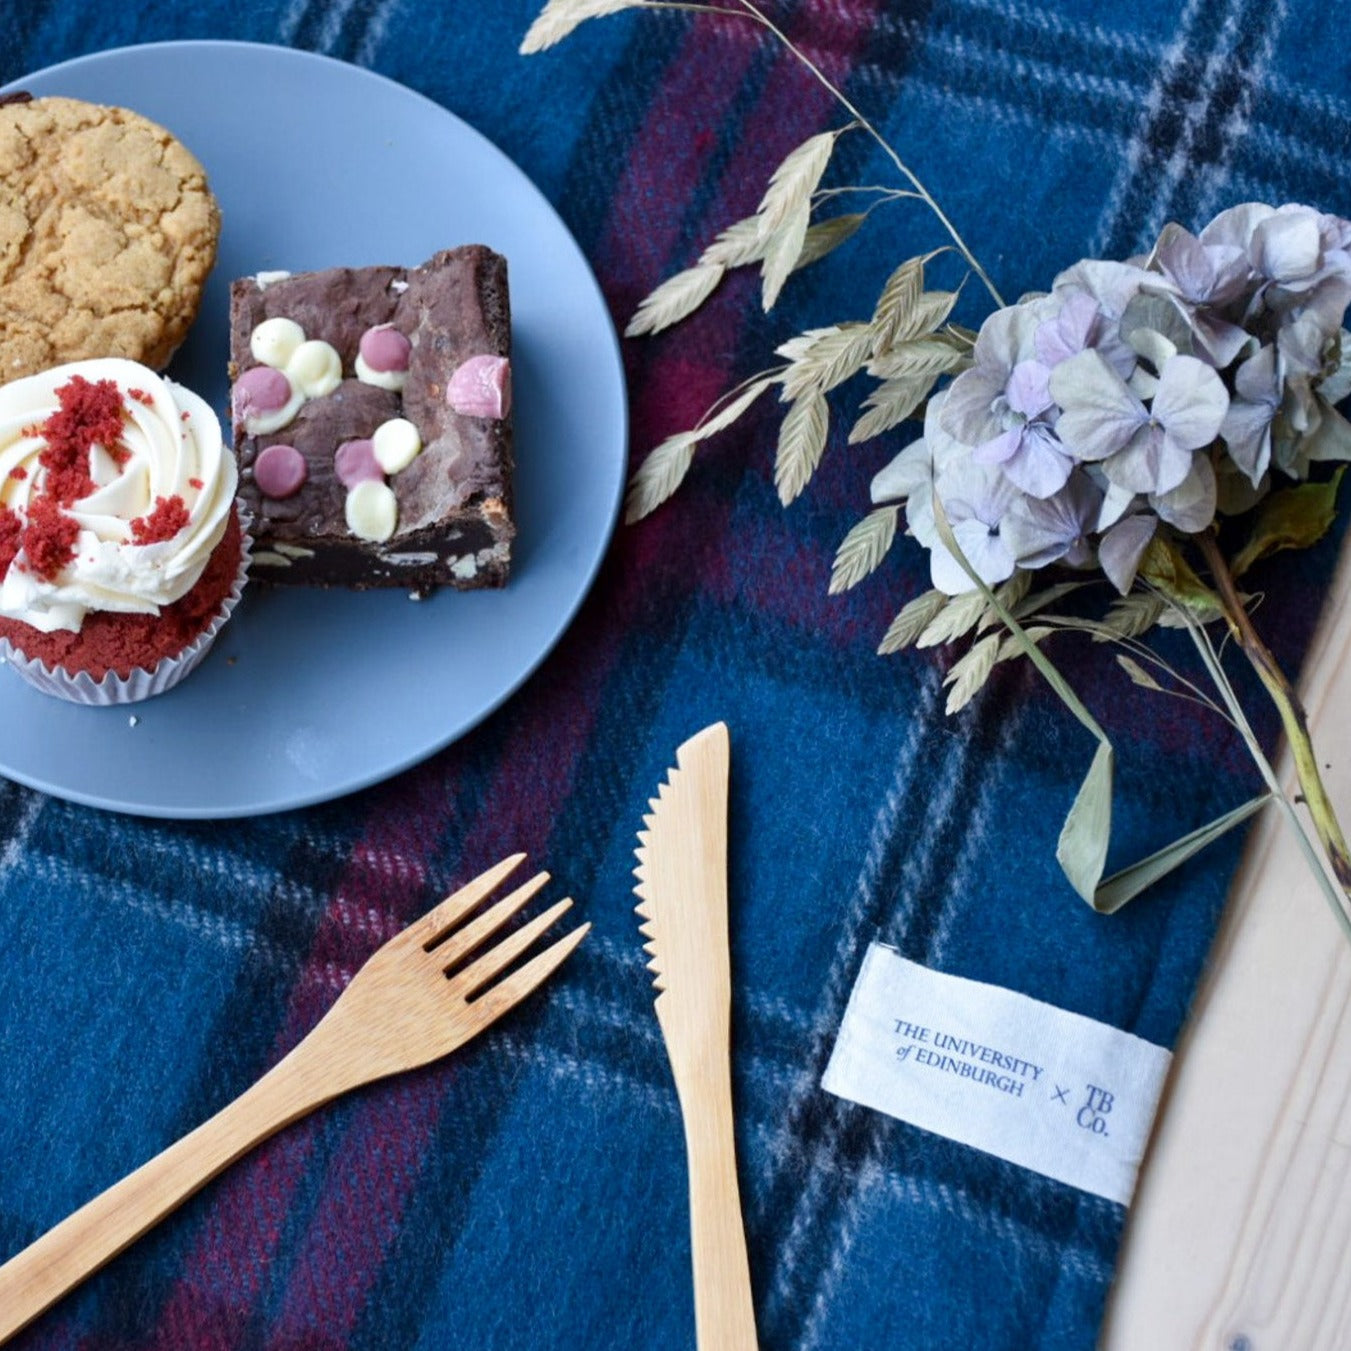 picnic blanket with wooden cutlery, flowers and a plate of cakes